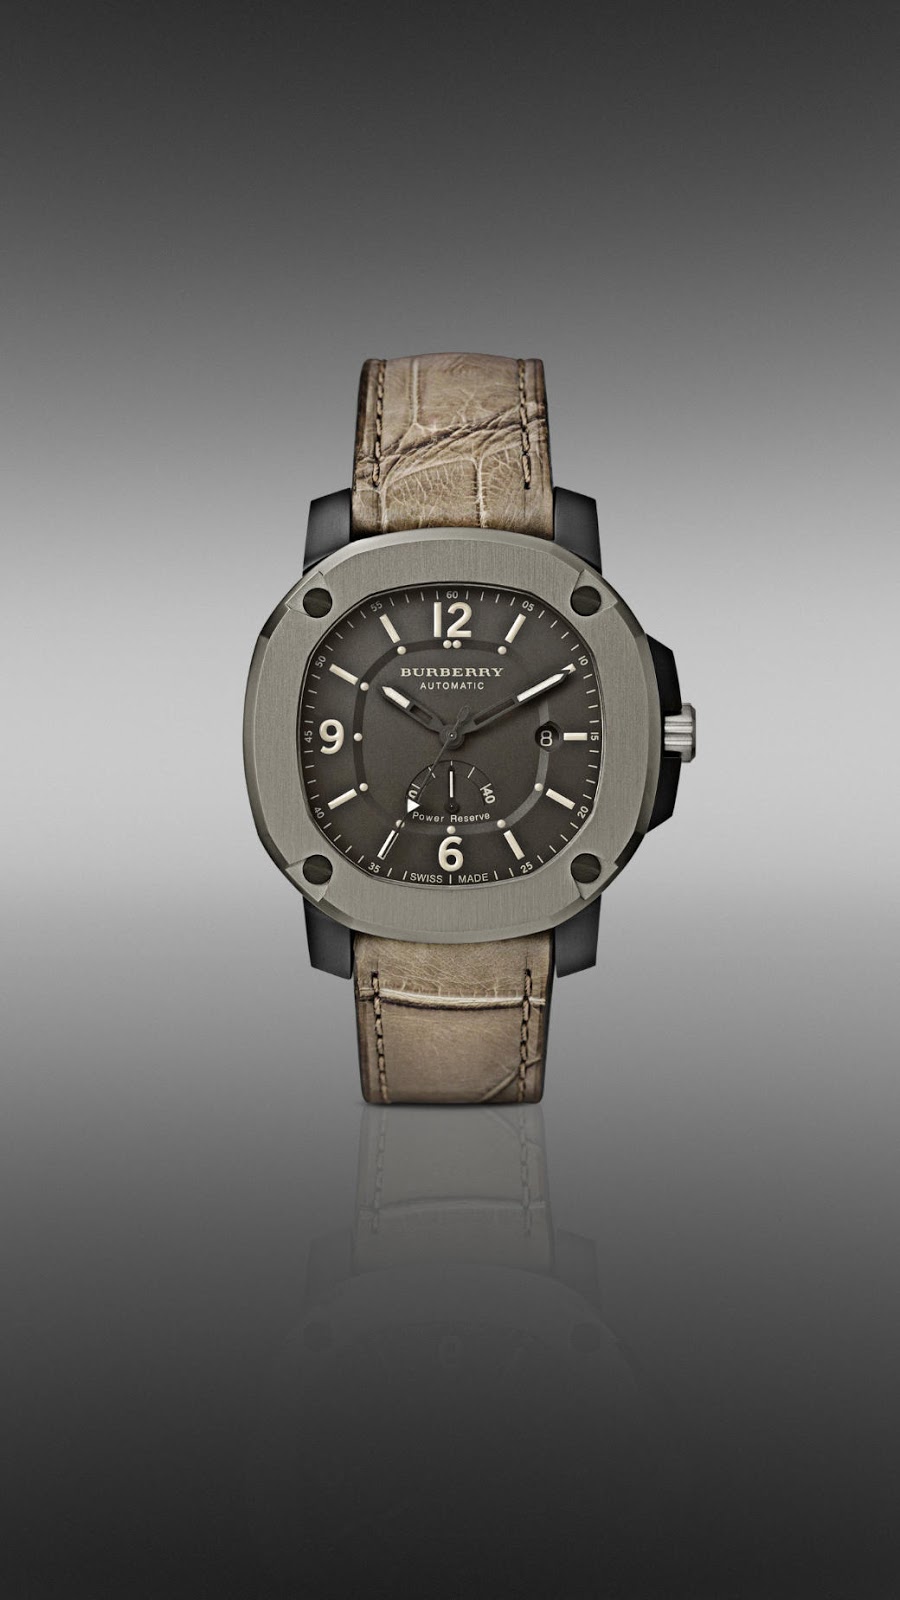 Disappear Here: Burberry Britain Watch Range Flagship BBY1000 Gunmetal.